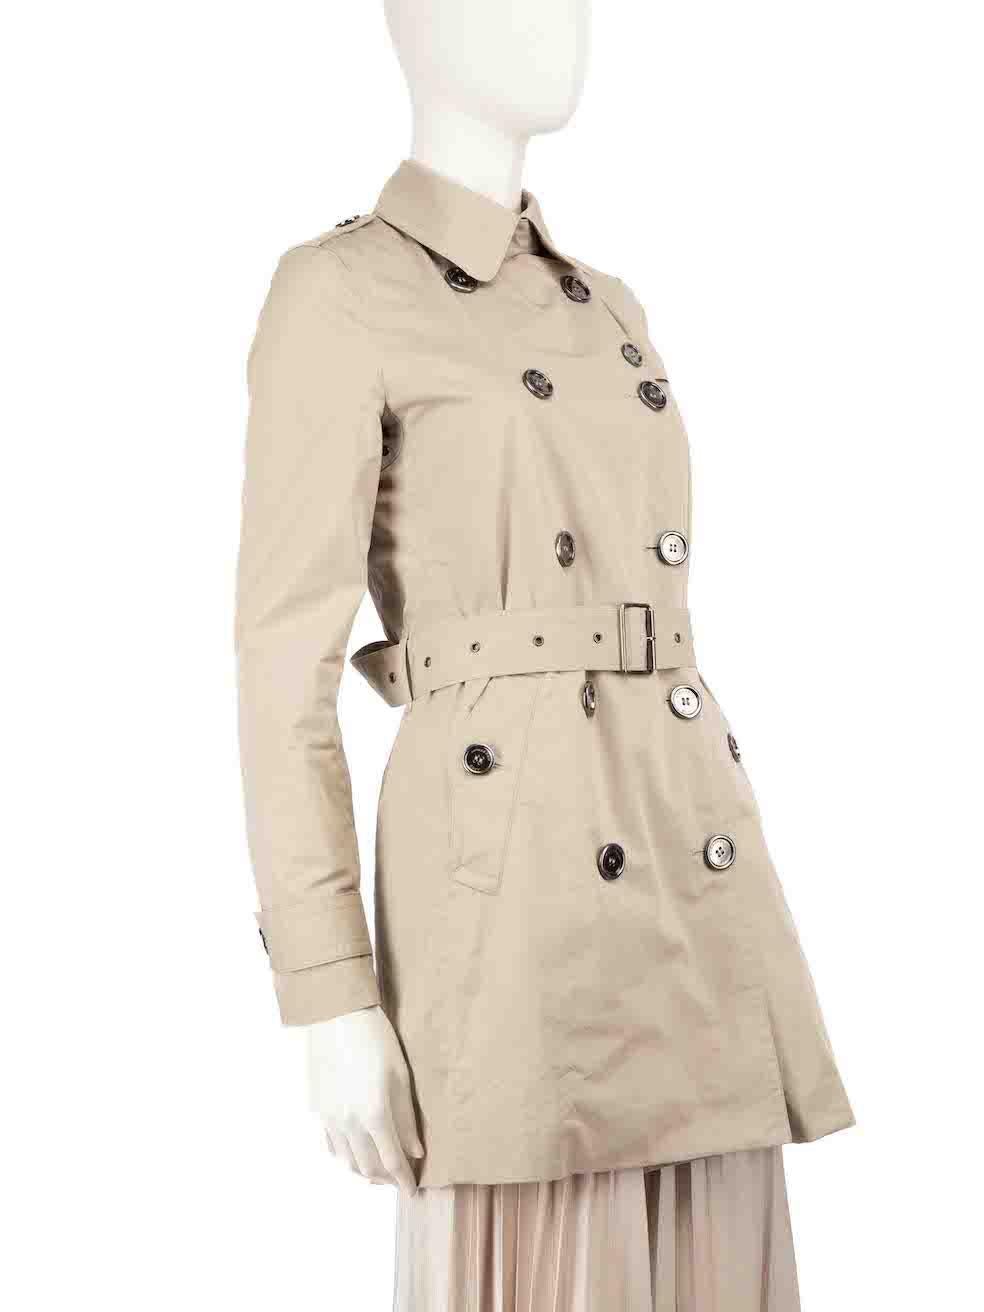 CONDITION is Very good. Hardly any visible wear to the trench coat is evident on this used Burberry designer resale item.
 
 
 
 Details
 
 
 Beige
 
 Cotton
 
 Trench coat
 
 Double breasted
 
 Belted
 
 Long sleeves
 
 Buttoned cuffs
 
 Button up